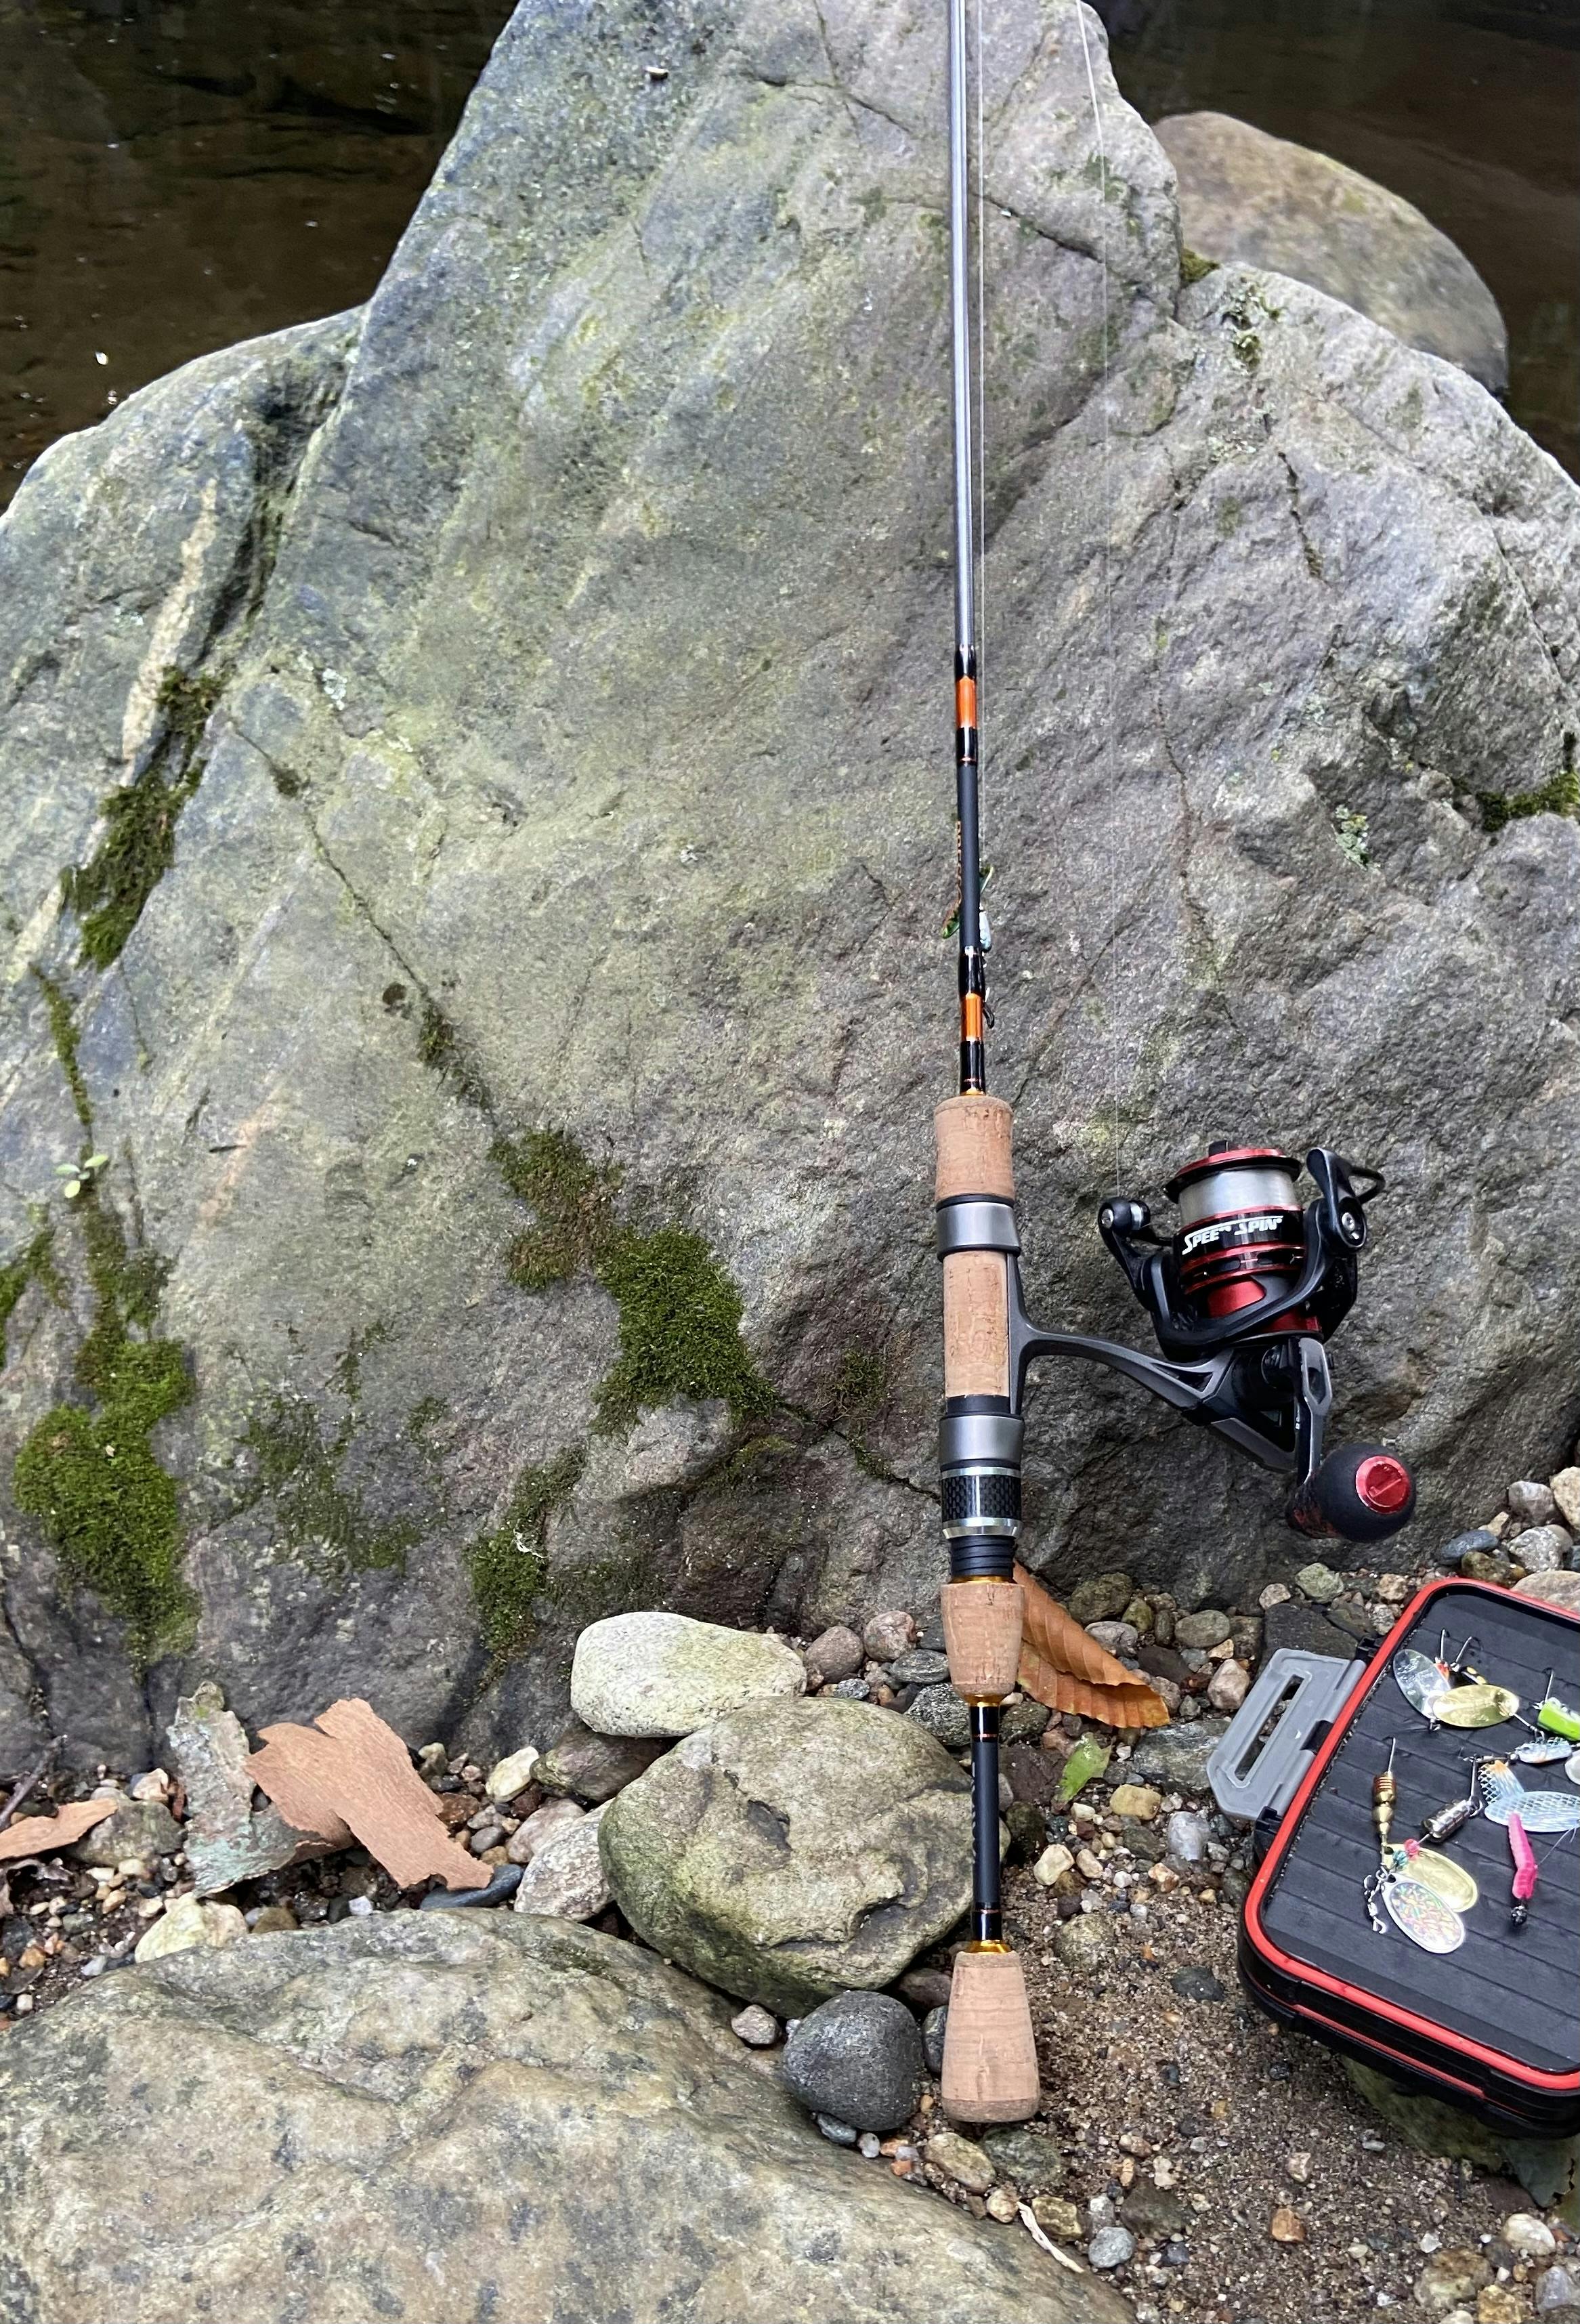 Daiwa Presso 5'6" Ultralight Spinning Rod, Lew's Carbon Fire Spinning Reel, Sunline Sniper 2lb leaning against a rock. 